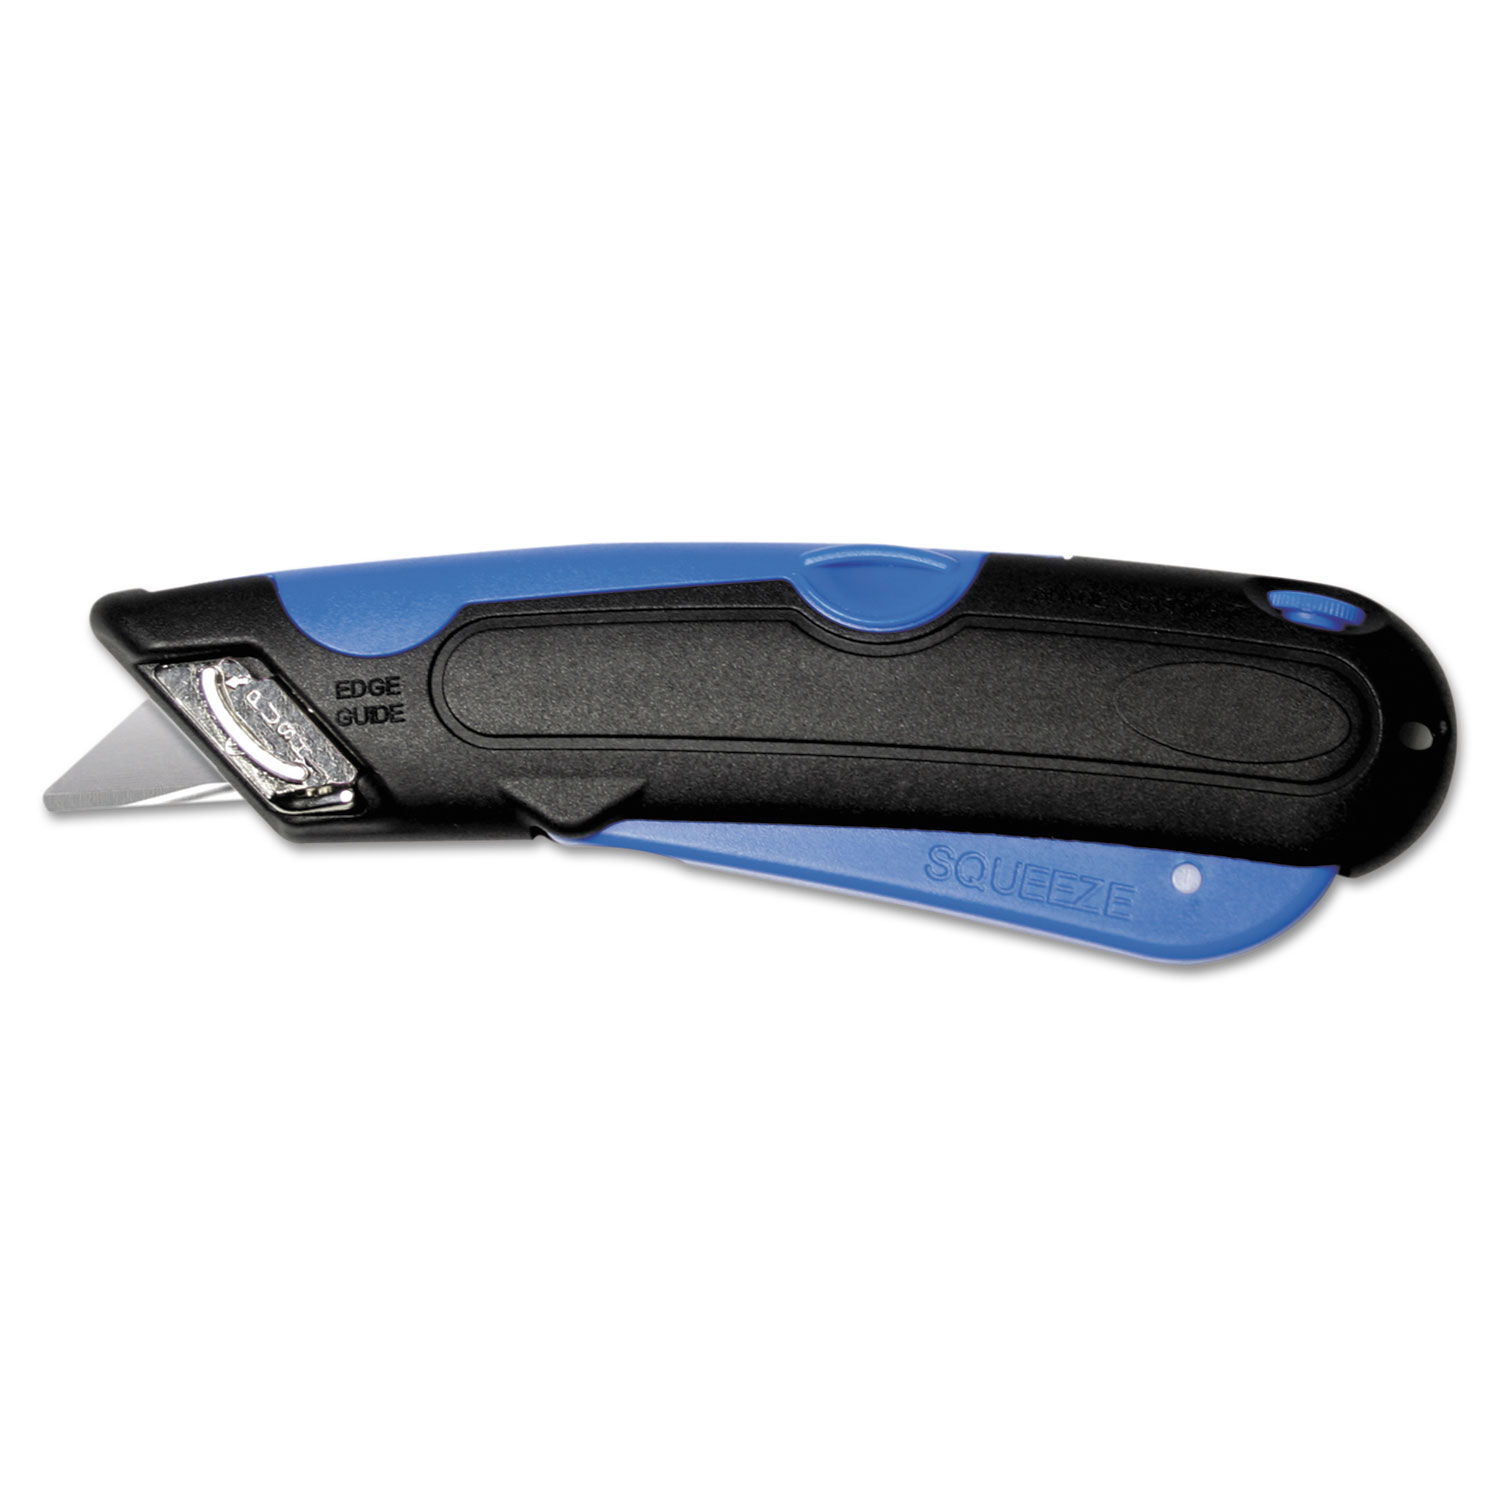  COSCO 091508 Easycut Cutter Knife w/Self-Retracting Safety-Tipped Blade, Black/Blue (COS091508) 